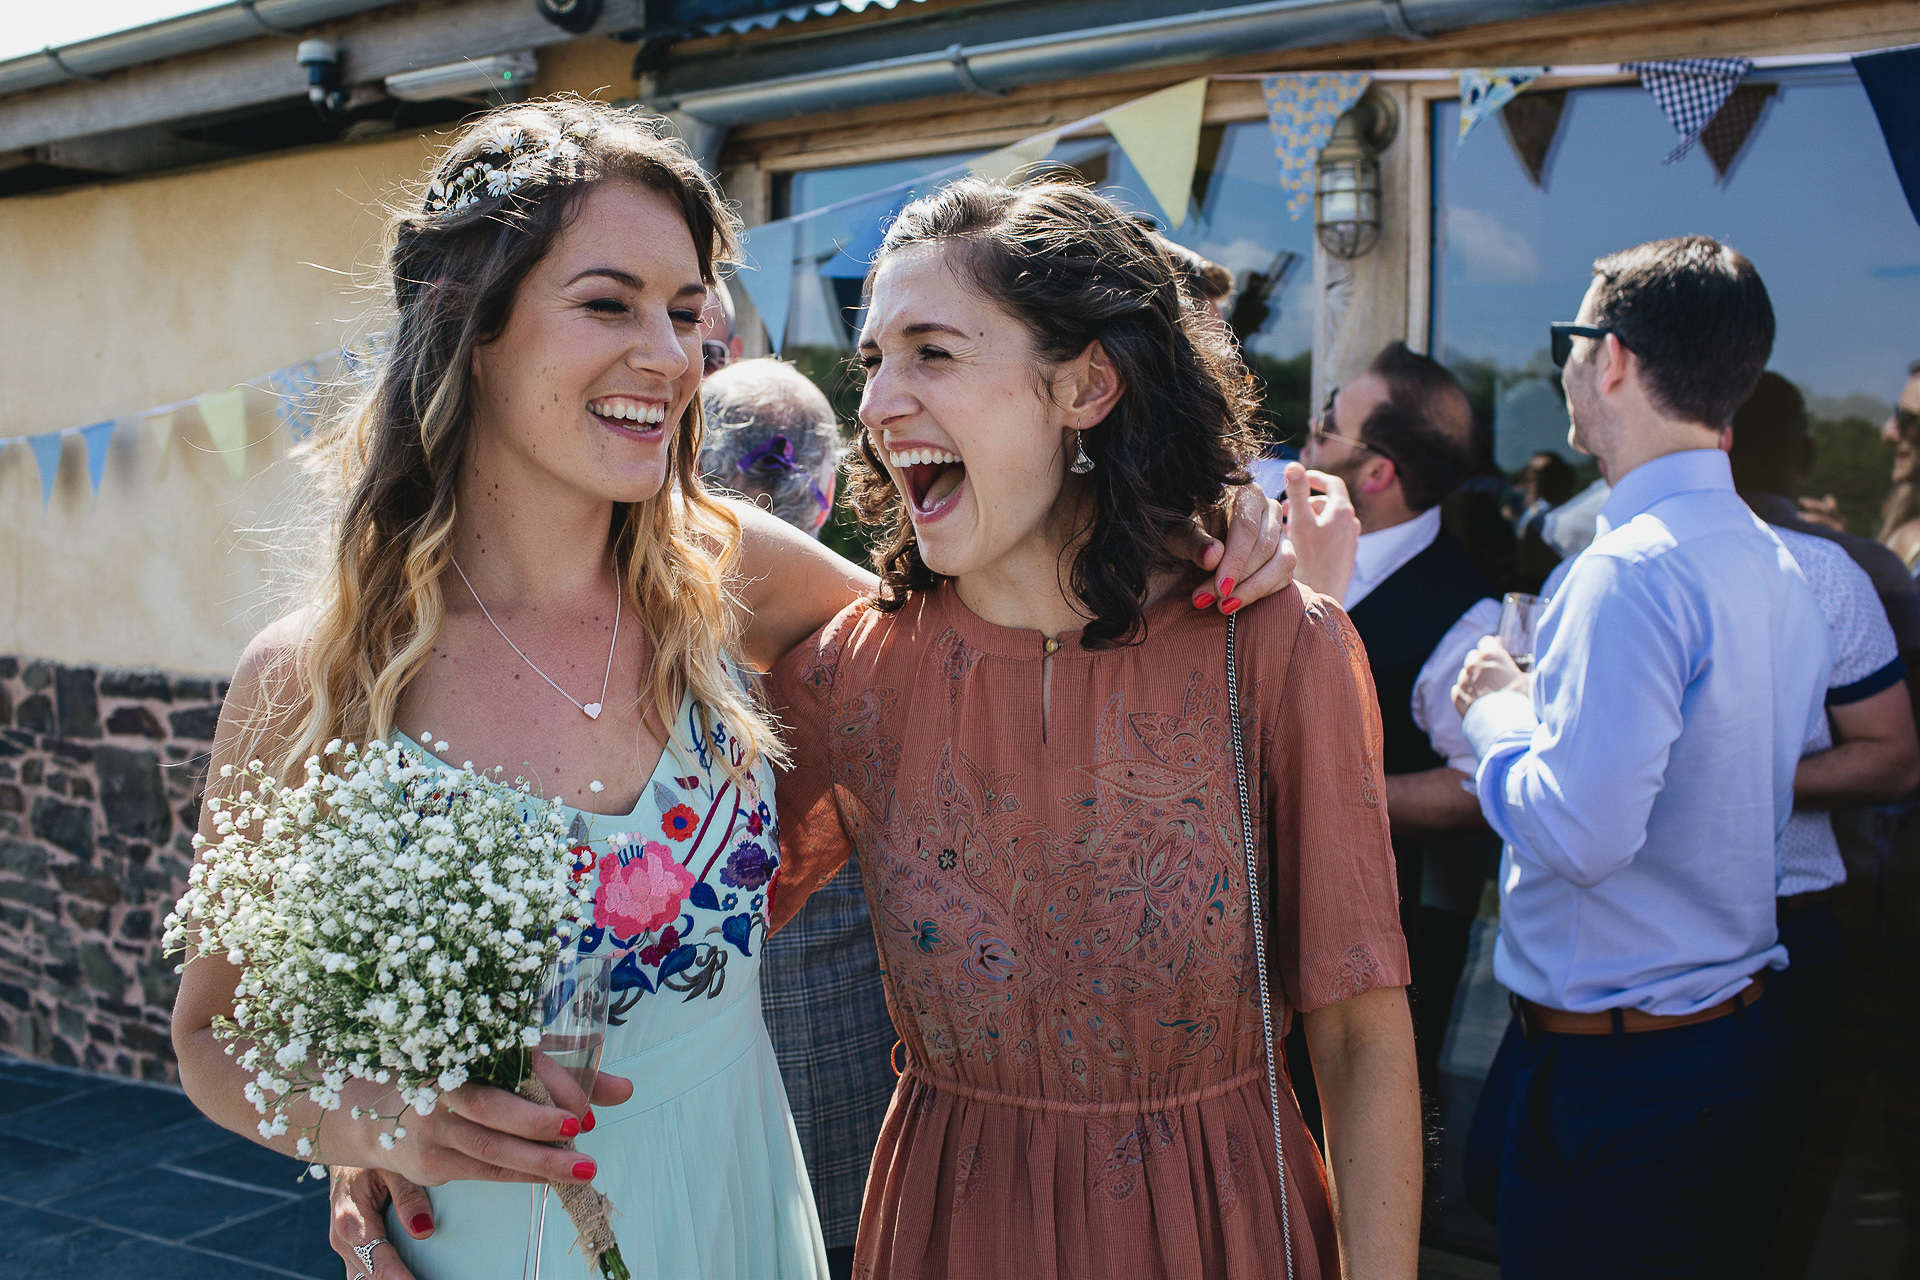 Bridesmaid and friend smiling together